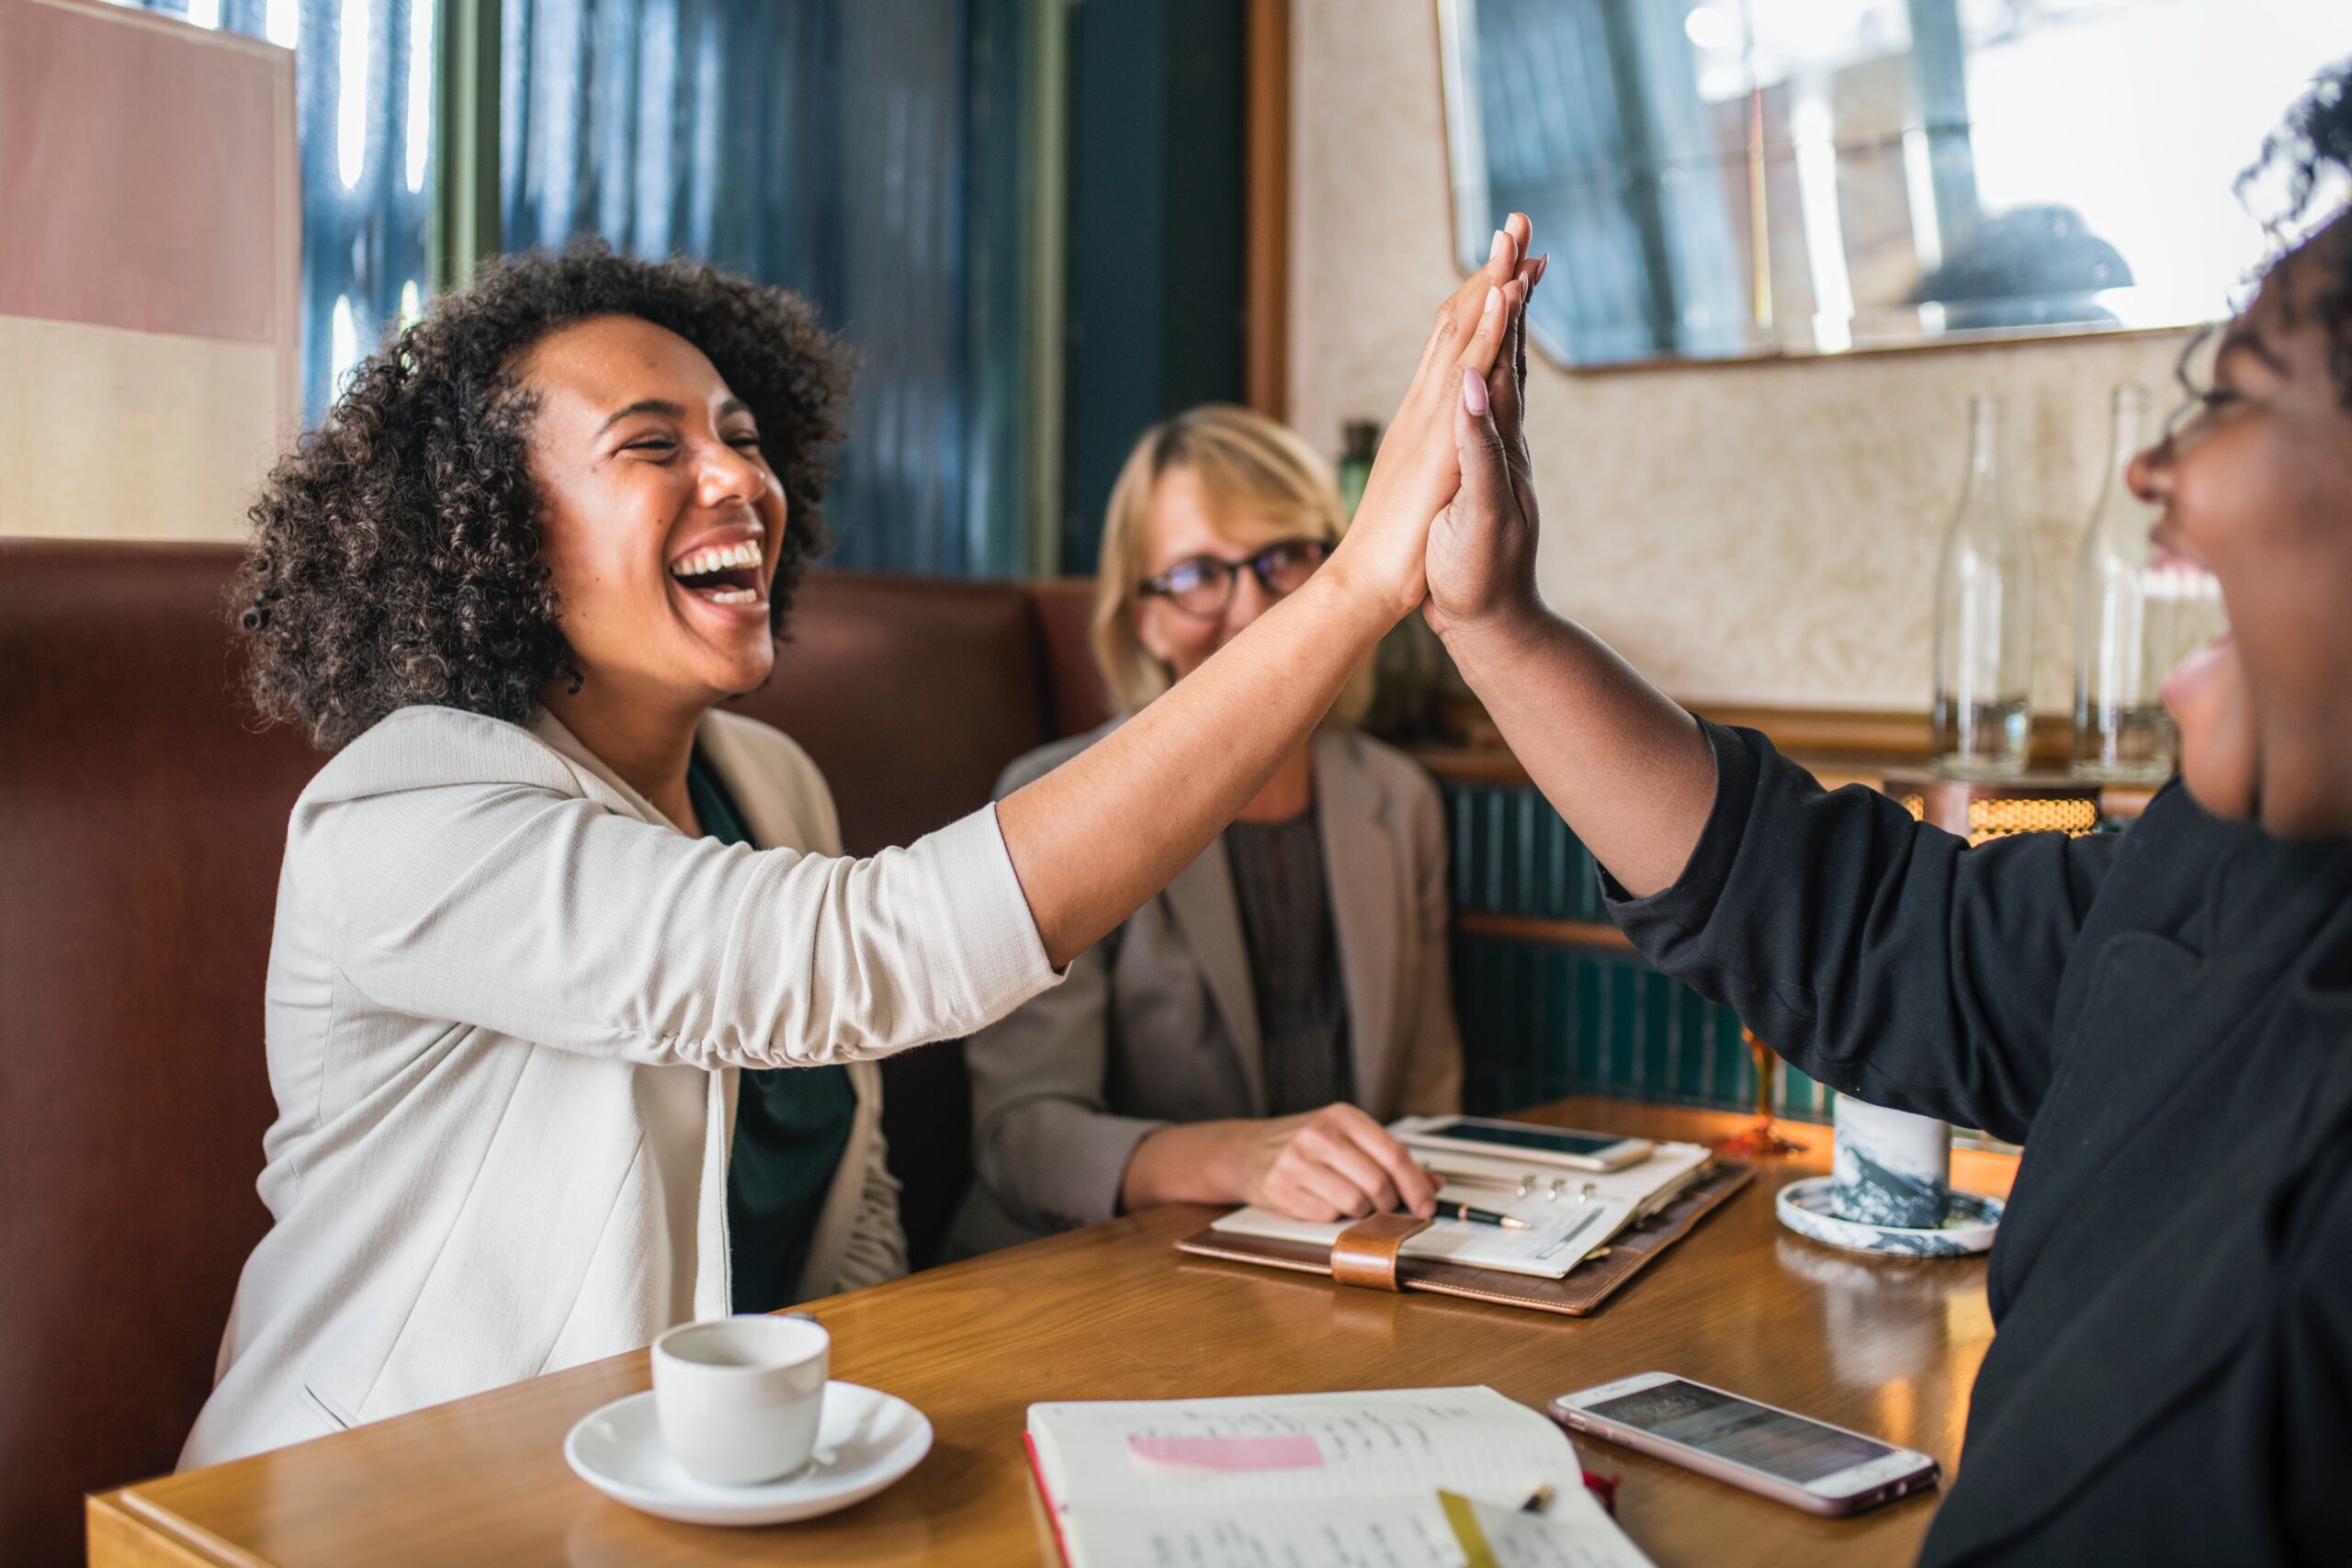 Two woman high five in a cafe